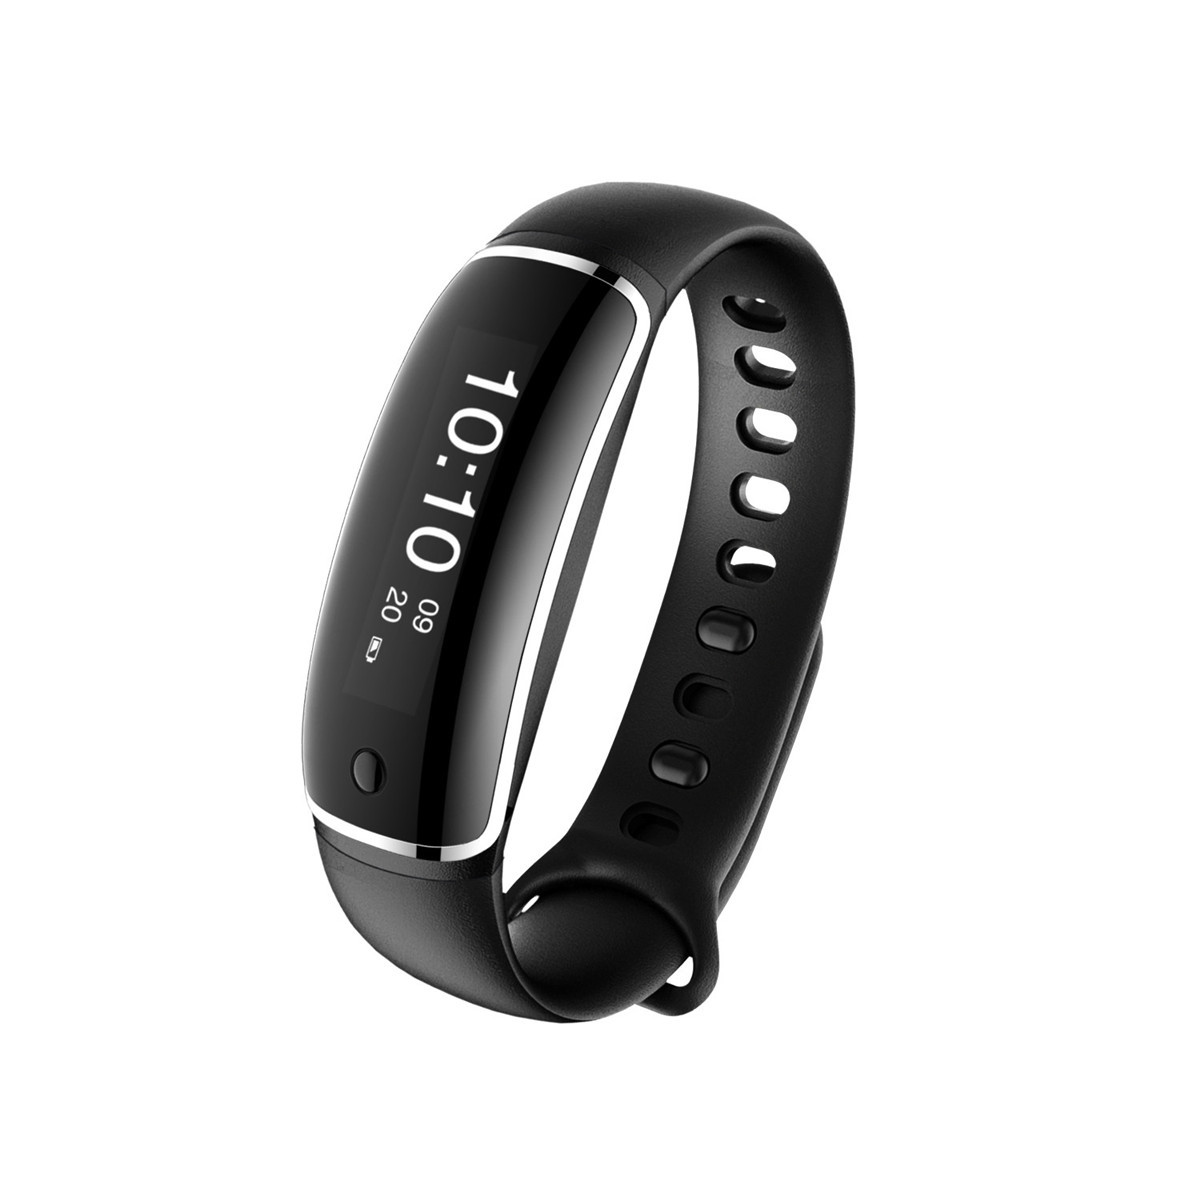 Bakeey M4 Smart Wristband Bracelet Heart Rate Monitor bluetooth 4.0 For Android/ iOS 2